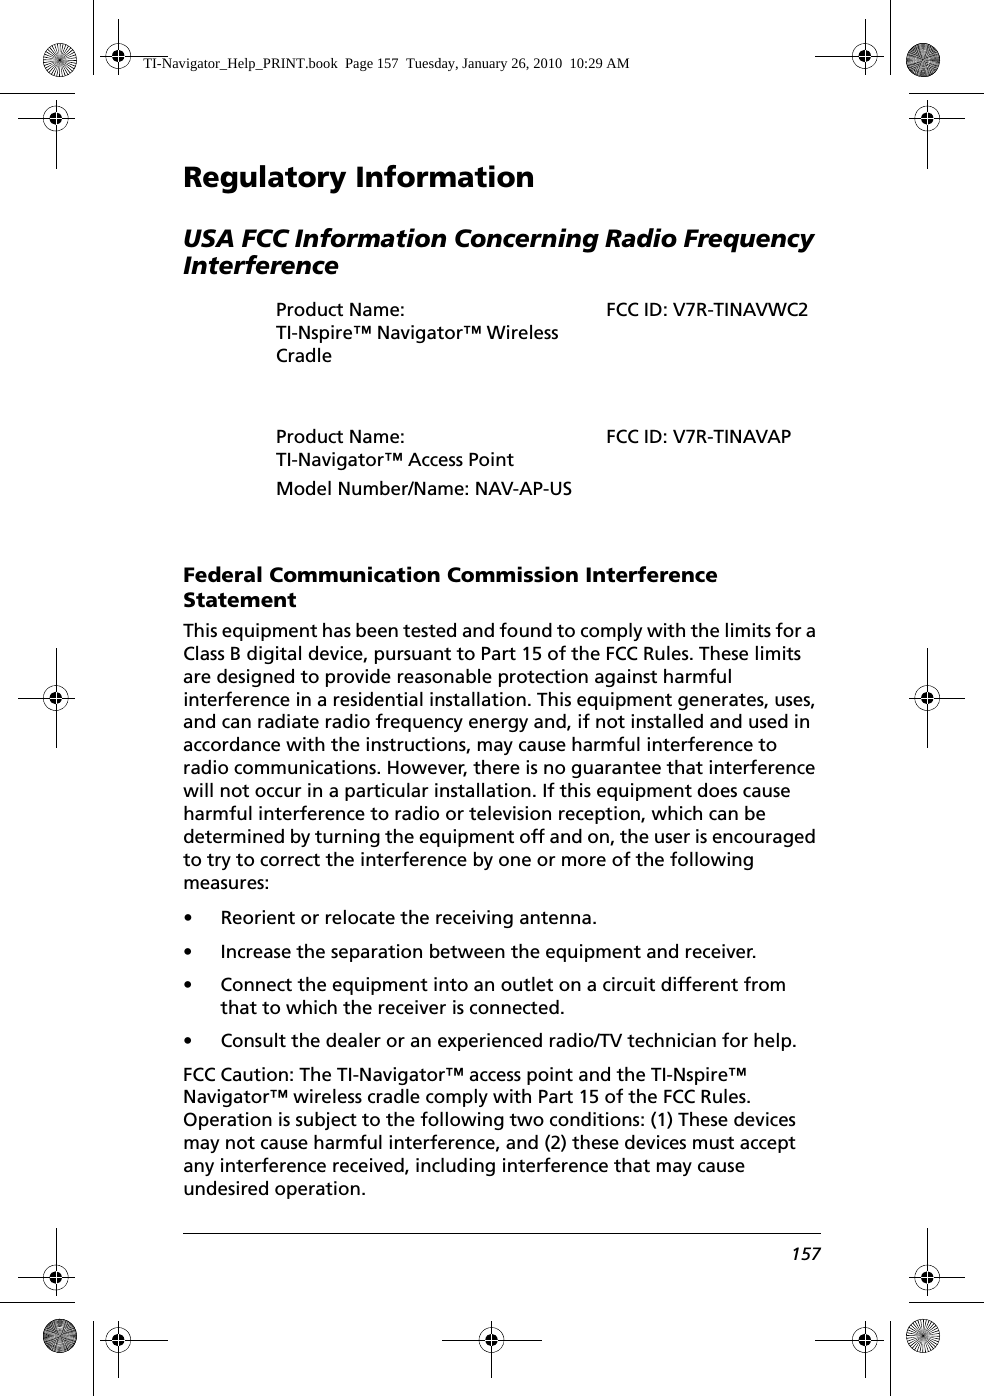 157Regulatory InformationUSA FCC Information Concerning Radio Frequency InterferenceFederal Communication Commission Interference StatementThis equipment has been tested and found to comply with the limits for a Class B digital device, pursuant to Part 15 of the FCC Rules. These limits are designed to provide reasonable protection against harmful interference in a residential installation. This equipment generates, uses, and can radiate radio frequency energy and, if not installed and used in accordance with the instructions, may cause harmful interference to radio communications. However, there is no guarantee that interference will not occur in a particular installation. If this equipment does cause harmful interference to radio or television reception, which can be determined by turning the equipment off and on, the user is encouraged to try to correct the interference by one or more of the following measures:• Reorient or relocate the receiving antenna.• Increase the separation between the equipment and receiver.• Connect the equipment into an outlet on a circuit different from that to which the receiver is connected.• Consult the dealer or an experienced radio/TV technician for help.FCC Caution: The TI-Navigator™ access point and the TI-Nspire™ Navigator™ wireless cradle comply with Part 15 of the FCC Rules. Operation is subject to the following two conditions: (1) These devices may not cause harmful interference, and (2) these devices must accept any interference received, including interference that may cause undesired operation.Product Name: TI-Nspire™ Navigator™ Wireless CradleProduct Name: TI-Navigator™ Access PointModel Number/Name: NAV-AP-USFCC ID: V7R-TINAVAPTI-Navigator_Help_PRINT.book  Page 157  Tuesday, January 26, 2010  10:29 AMFCC ID: V7R-TINAVWC2